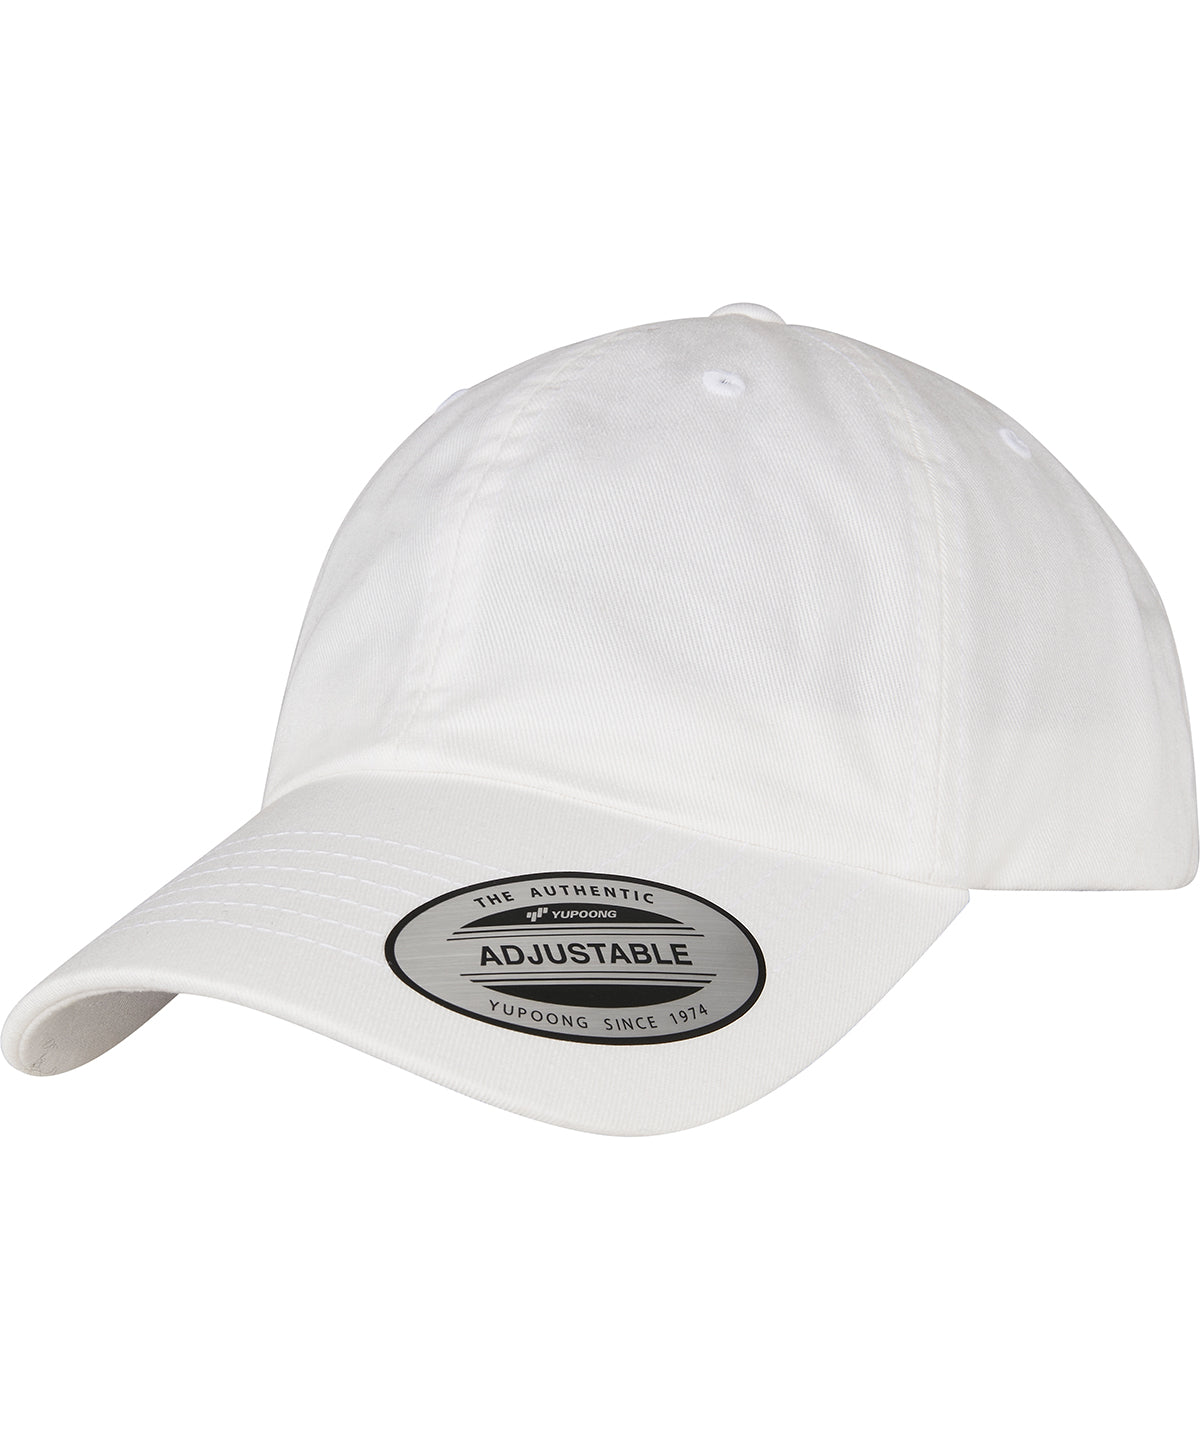 Personalised Caps - White Flexfit by Yupoong Eco-wash dad cap (6245EC)